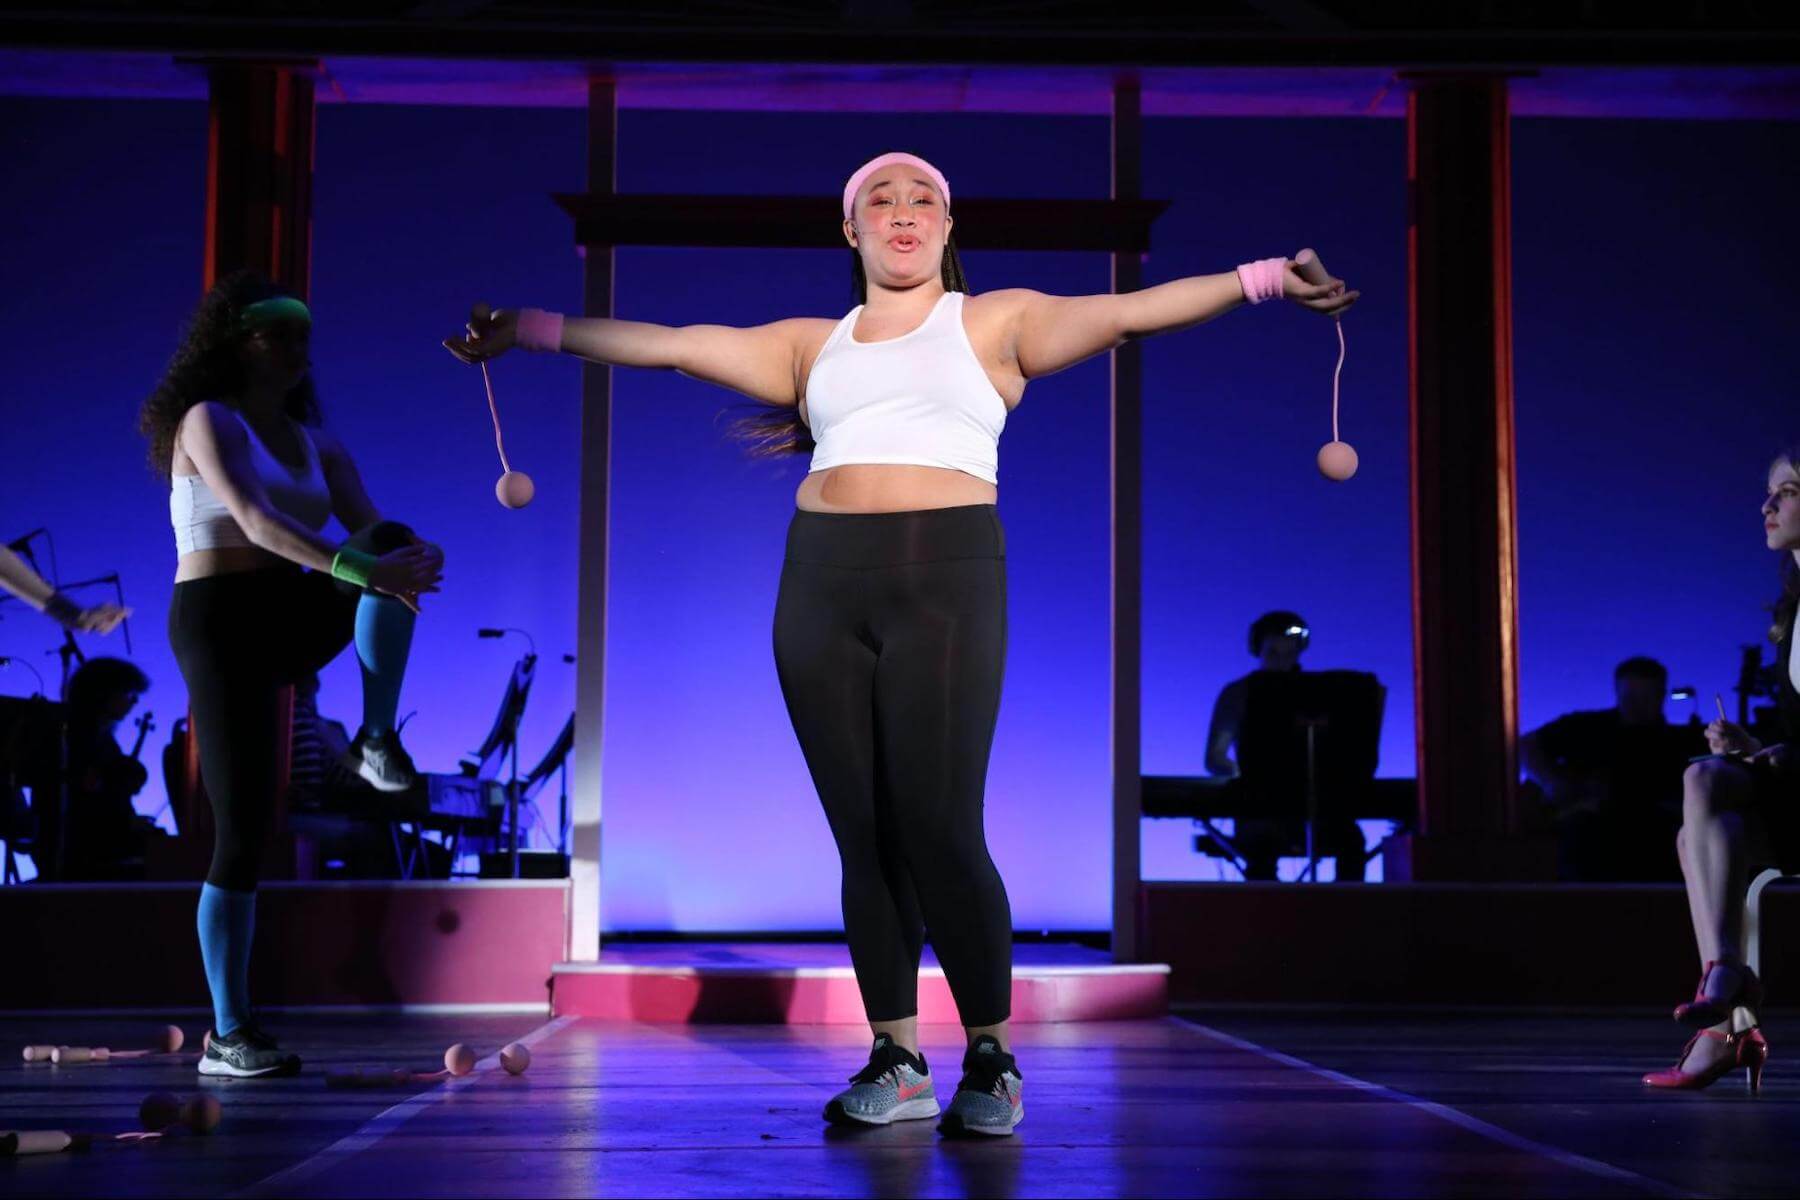 One Ethical Culture Fieldston Upper School student poses onstage in Legally Blonde.